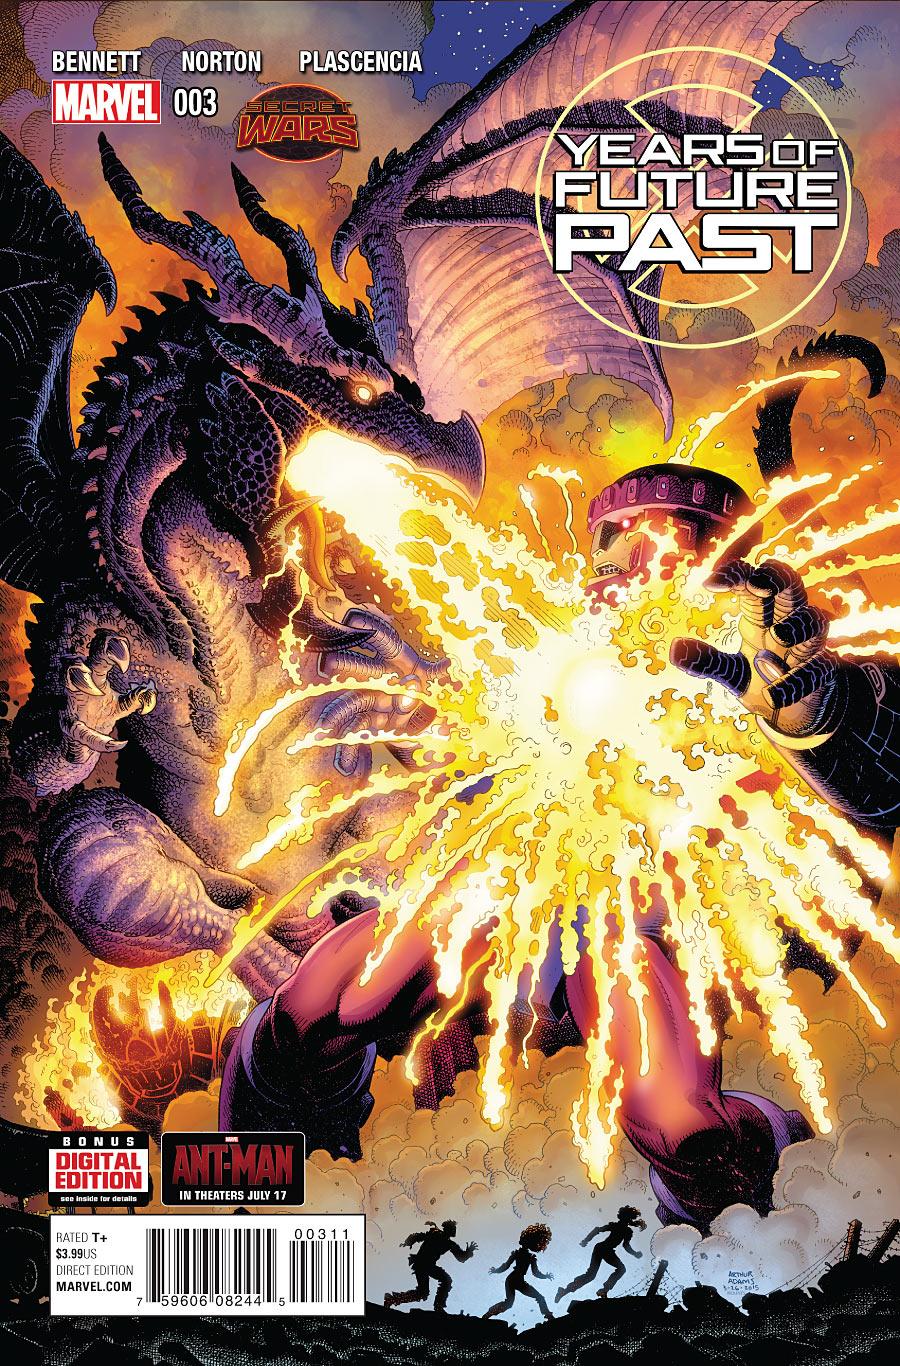 Years of Future Past Vol. 1 #3